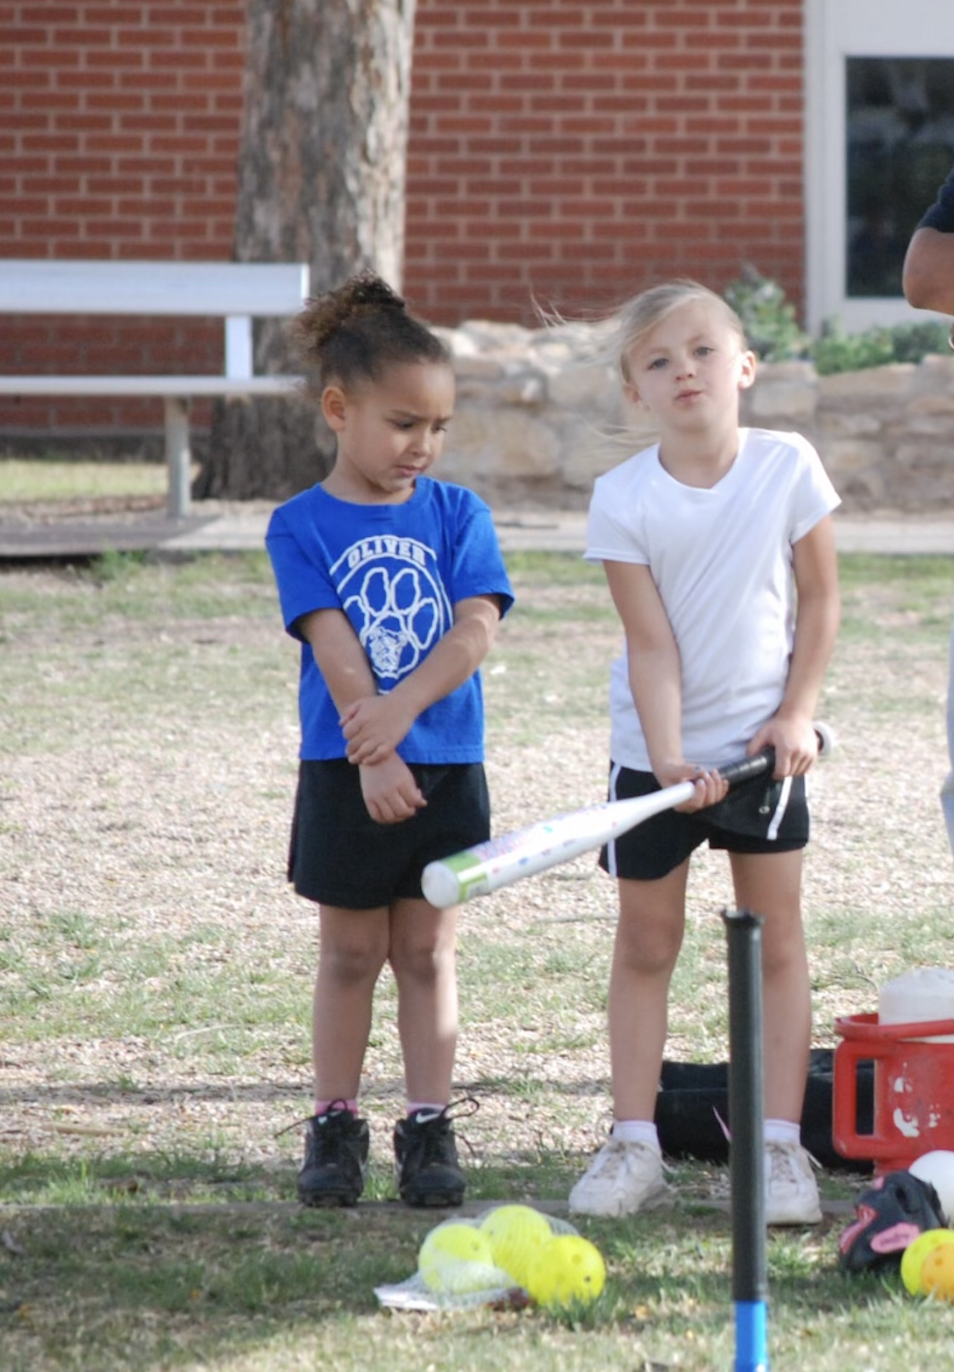 Laylonna Applin and Shandlee Mueller have played softball together since their adolescence.